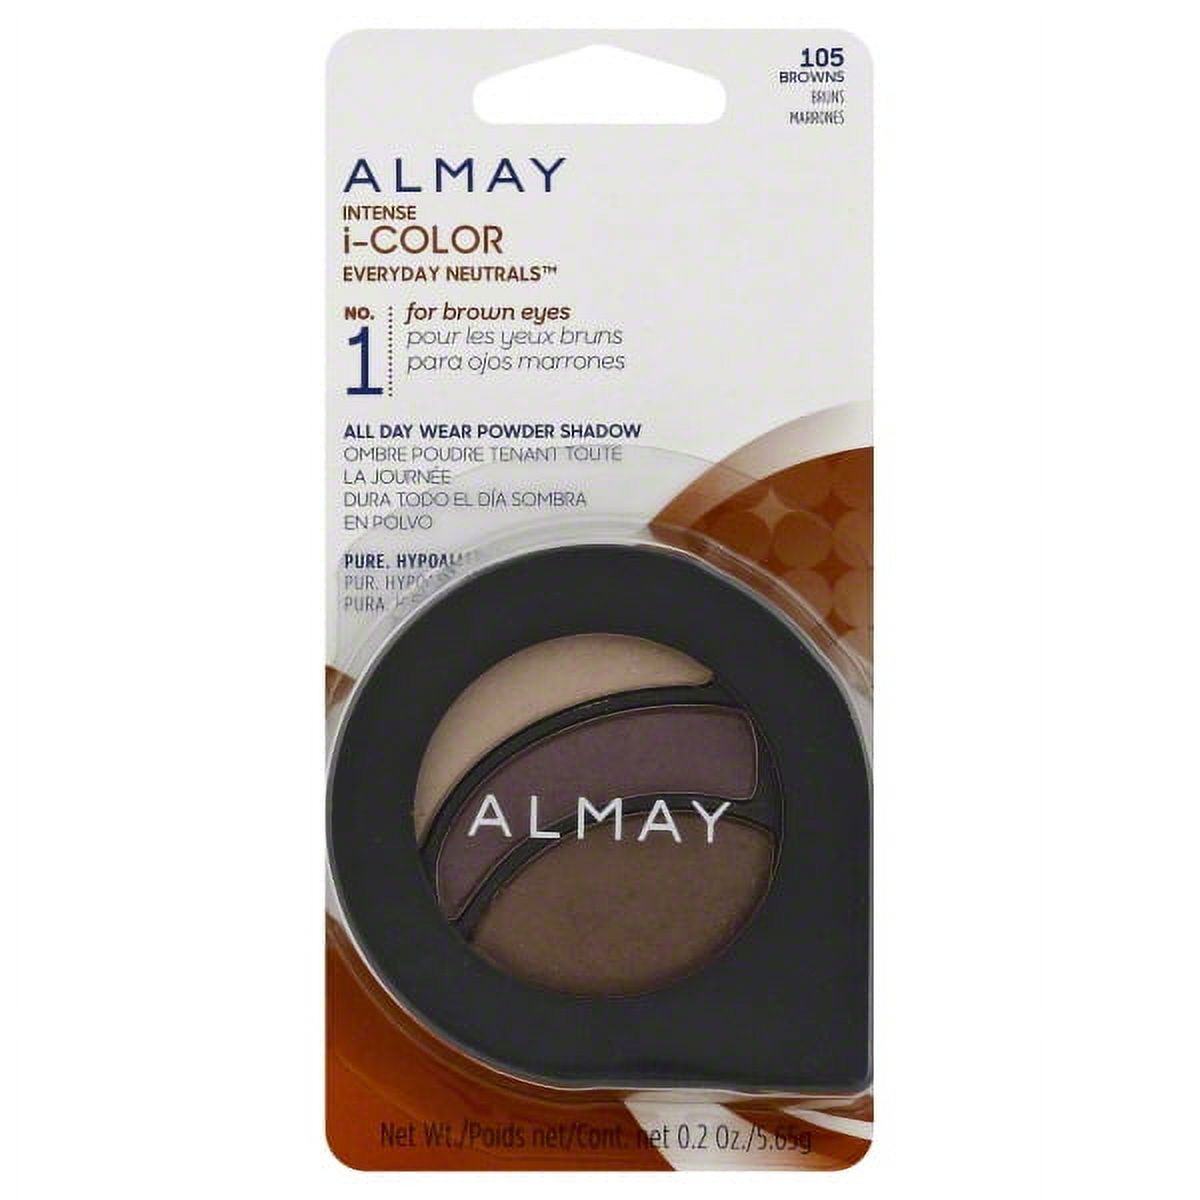 Almay Intense I-Color Everyday Neutrals All Day Wear Powder Eye Shadow, For Brown Eyes - image 2 of 6